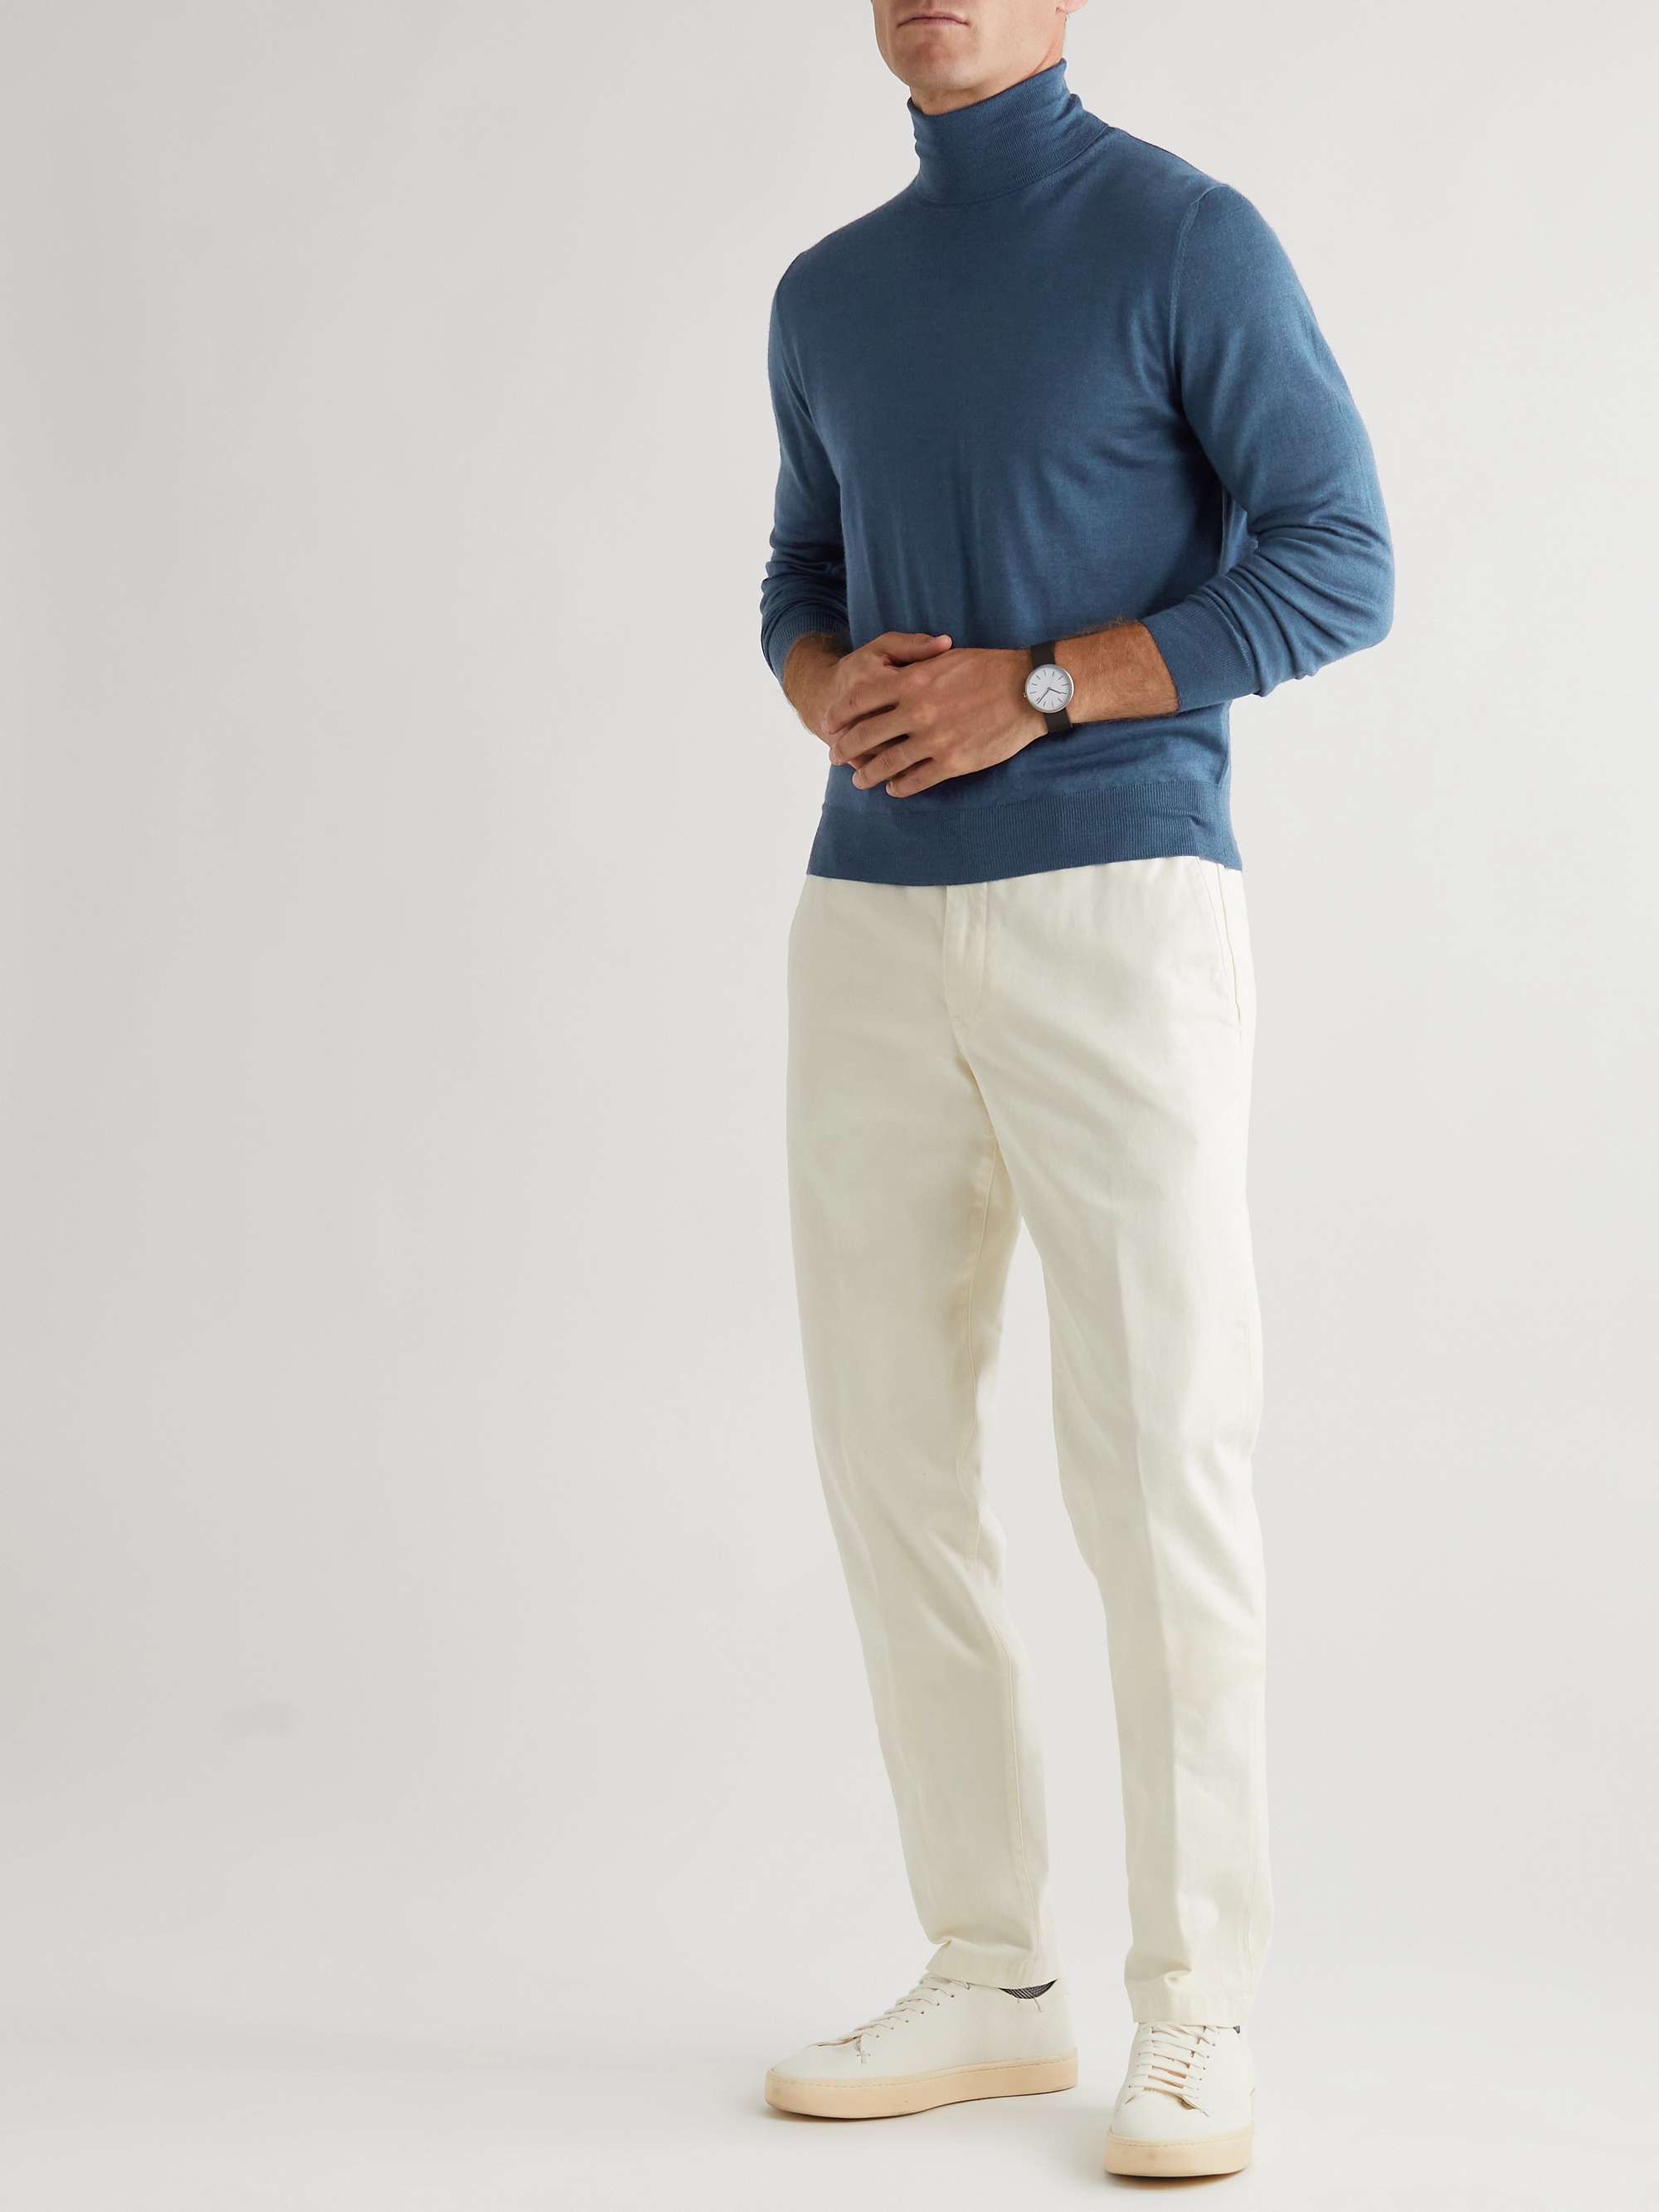 CANALI Cashmere, Wool and Silk-Blend Rollneck Sweater